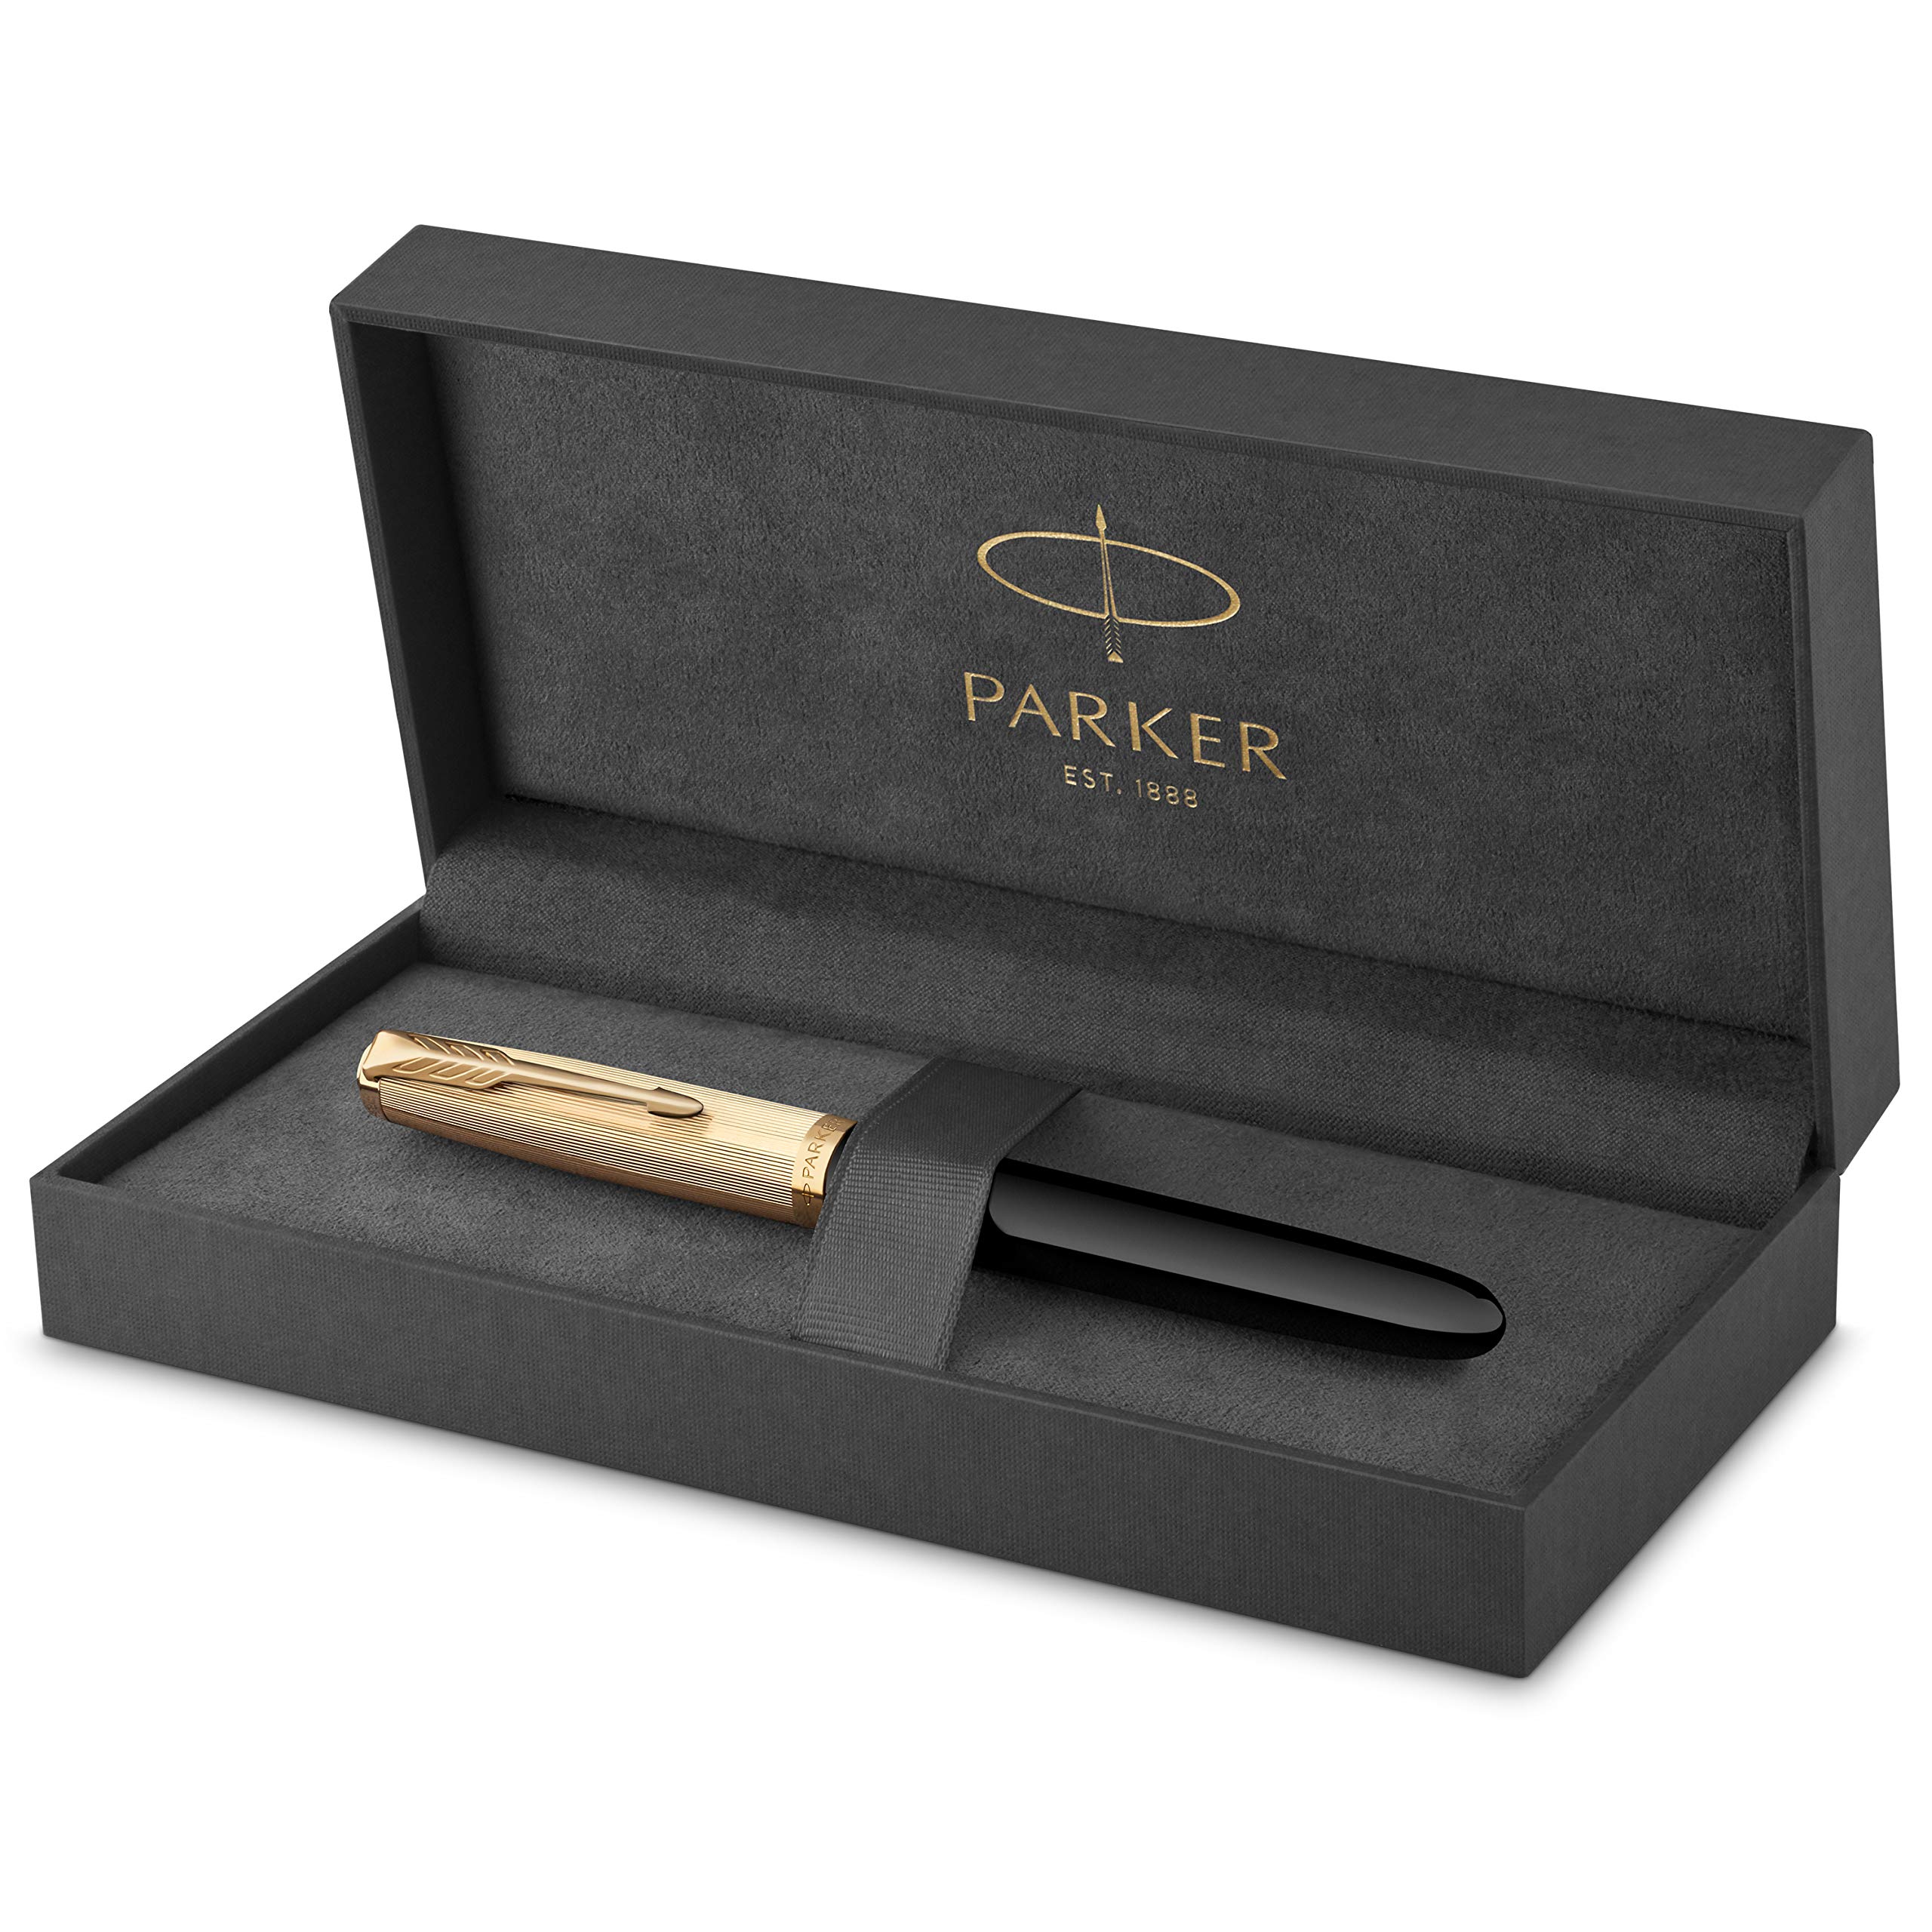 Faber-Castell Ambition Pearwood Rollerball by Faber-Castell　並行輸入品 - 2